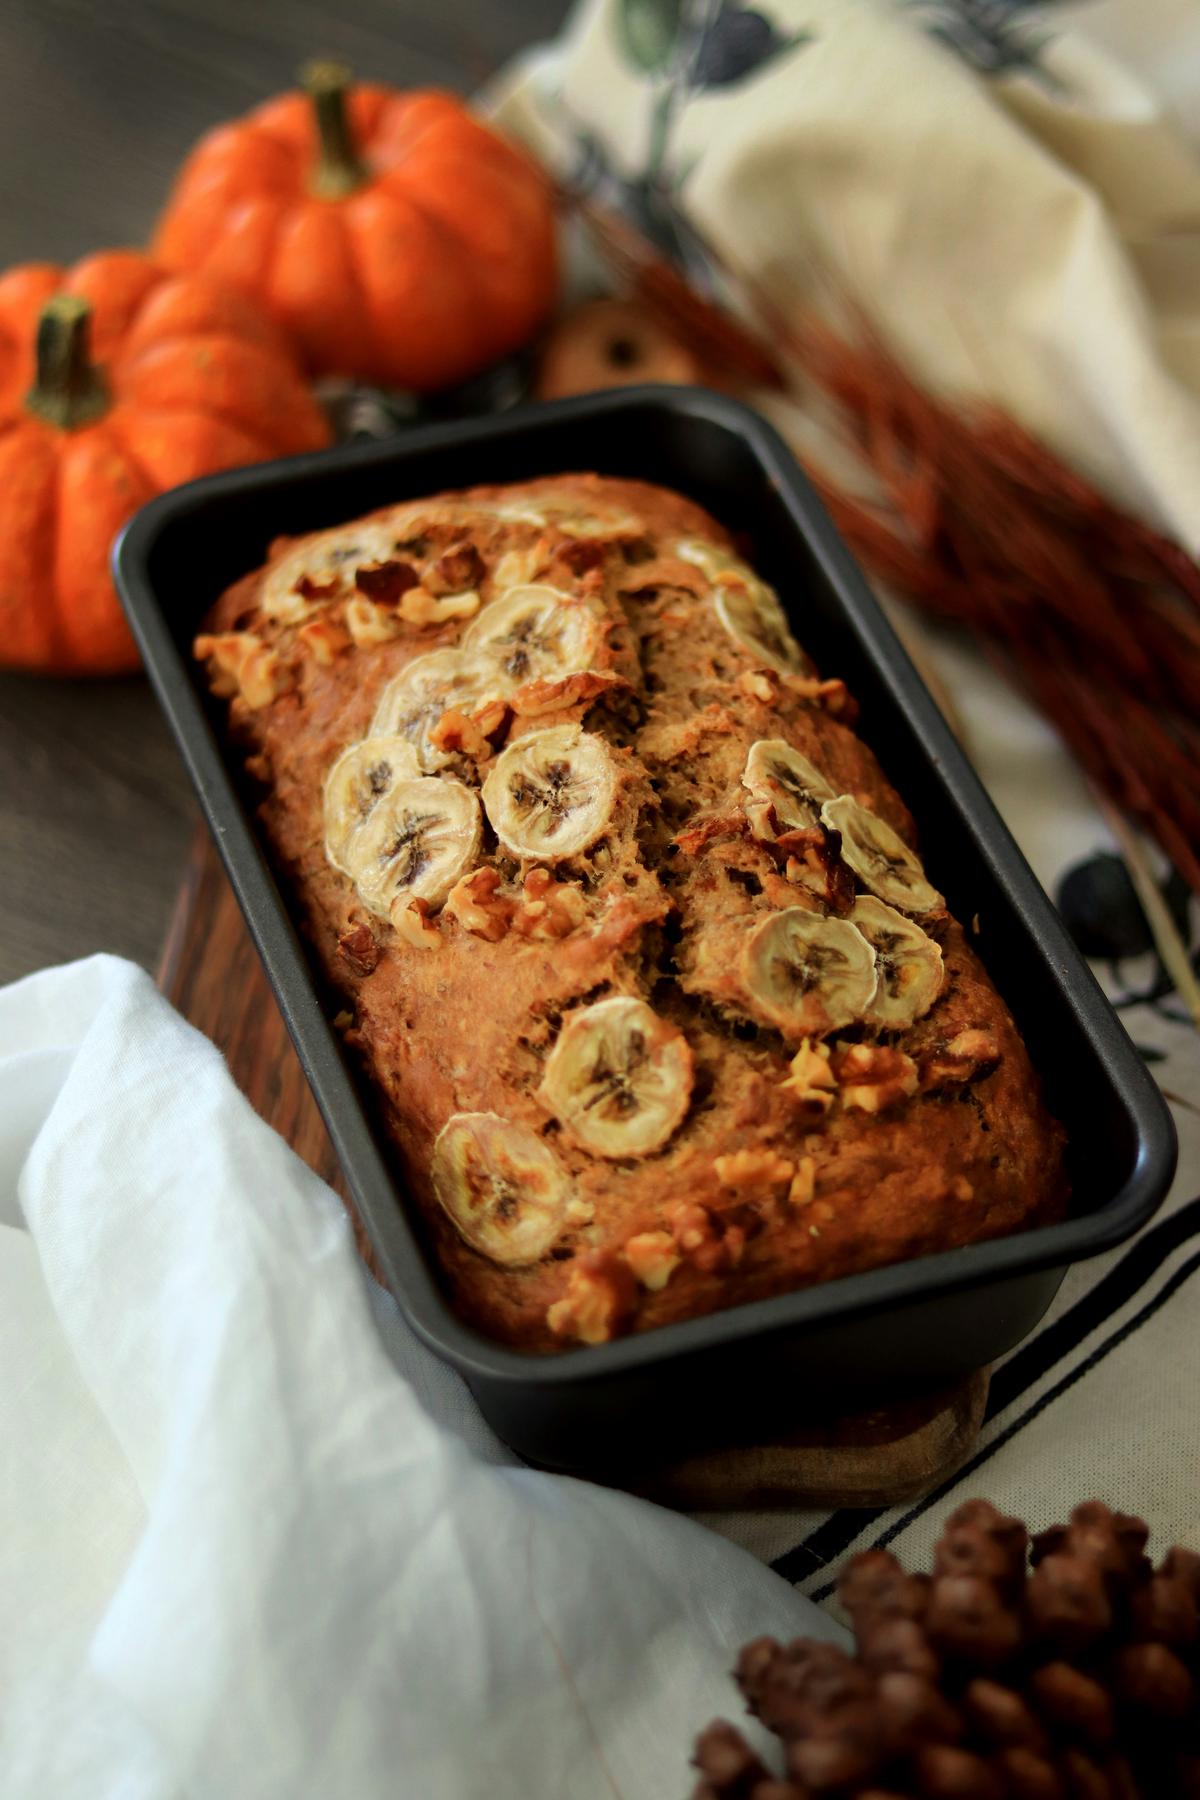 A delicious and moist banana bread loaf topped with sliced bananas.